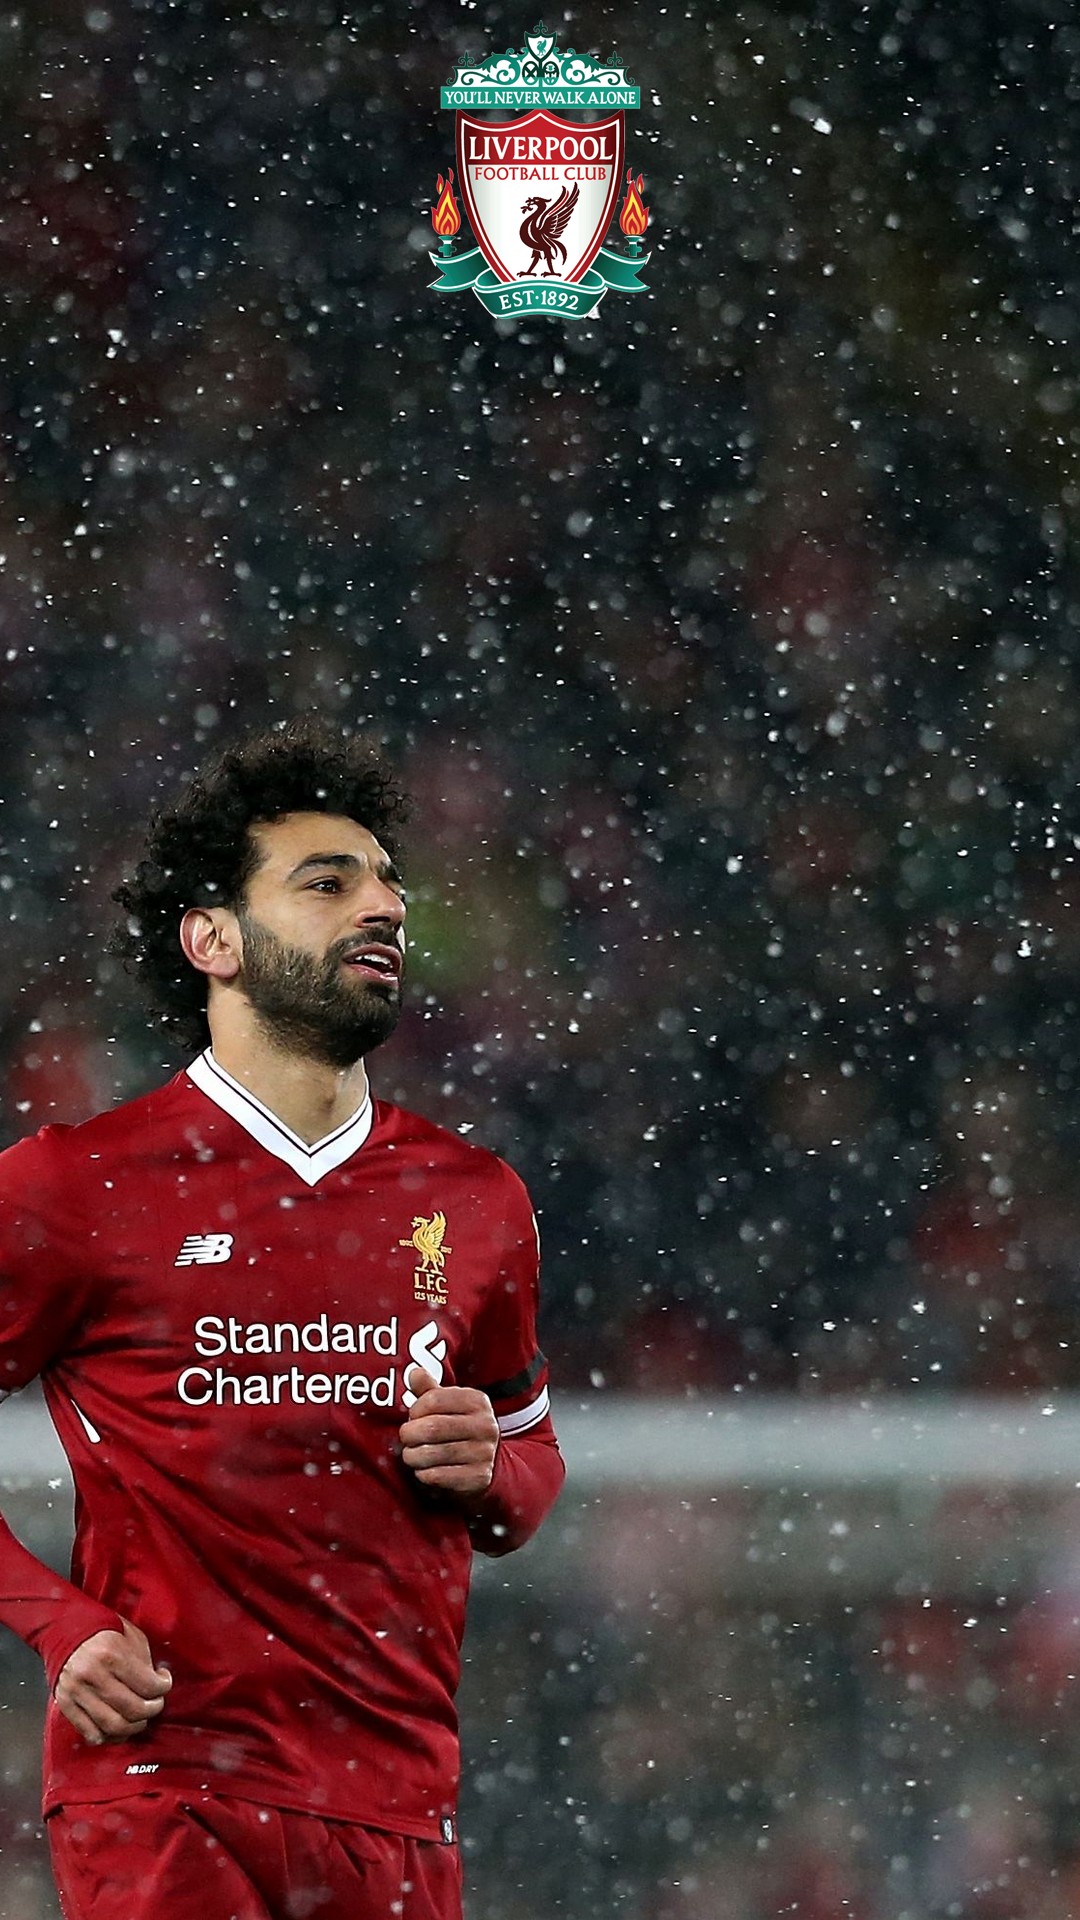 Mo Salah Wallpaper For Android with resolution 1080X1920 pixel. You can make this wallpaper for your Android backgrounds, Tablet, Smartphones Screensavers and Mobile Phone Lock Screen